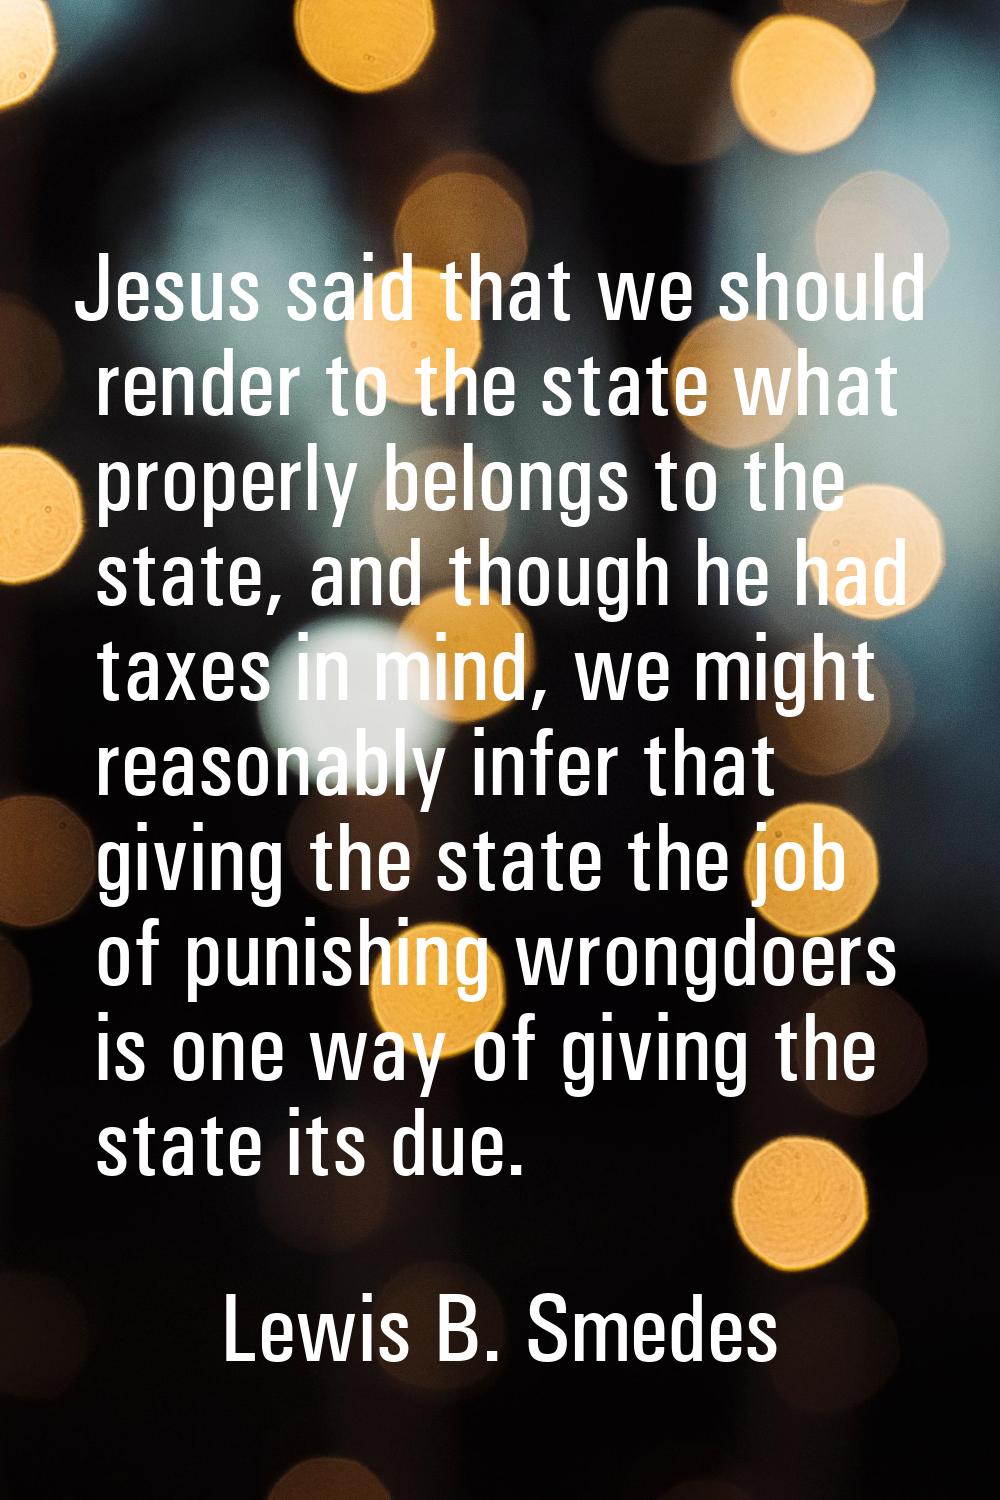 Jesus said that we should render to the state what properly belongs to the state, and though he had